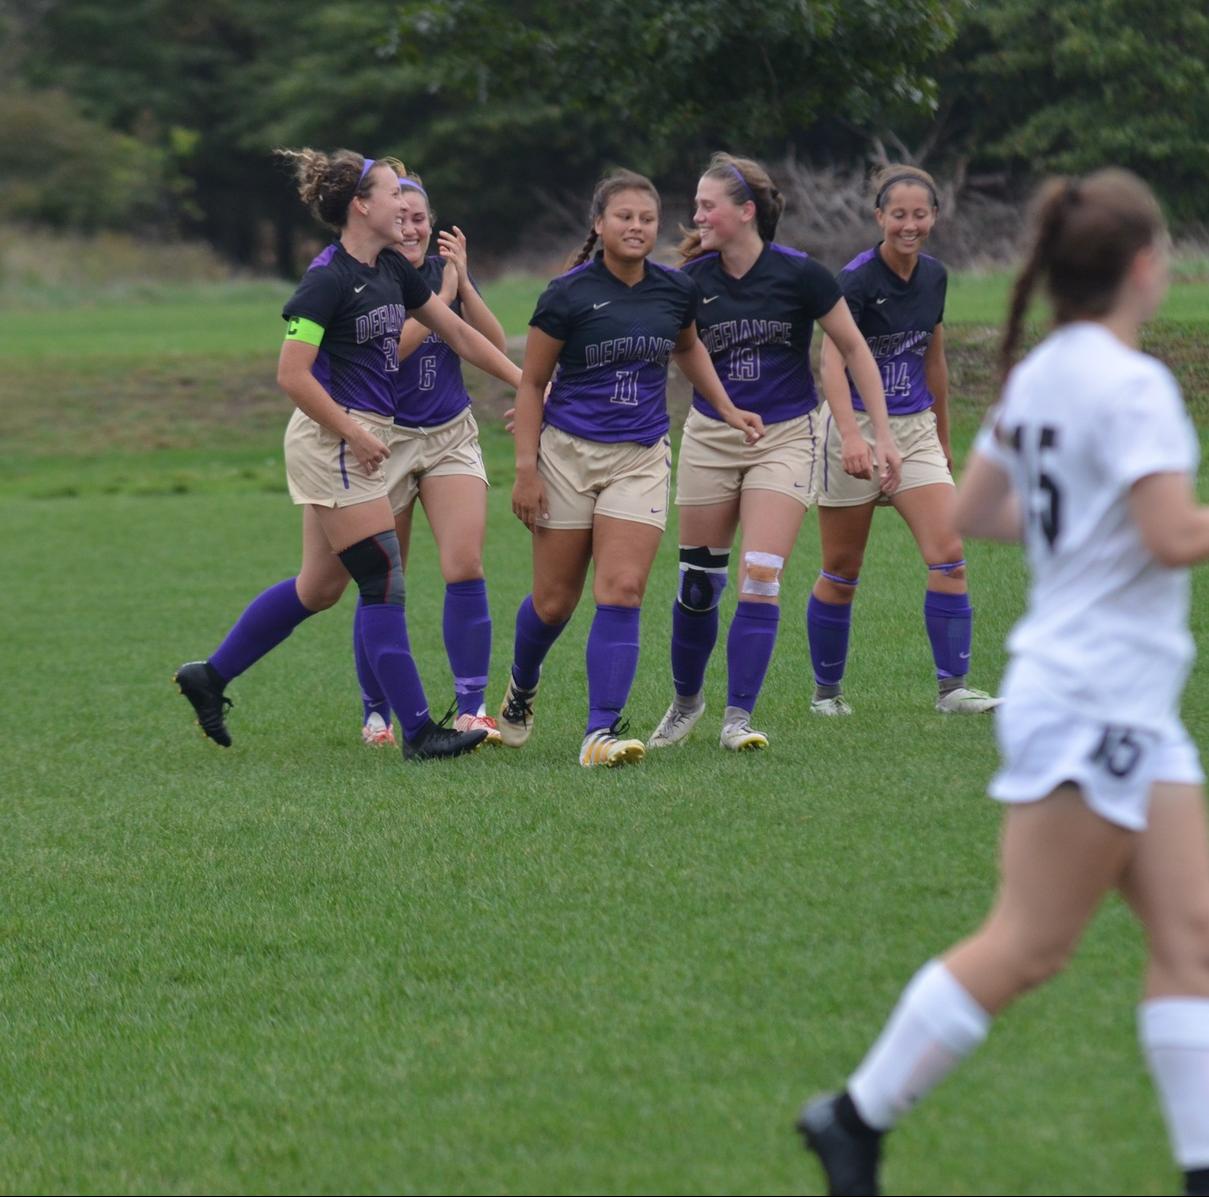 Women's Soccer Wins in Thrilling Fashion